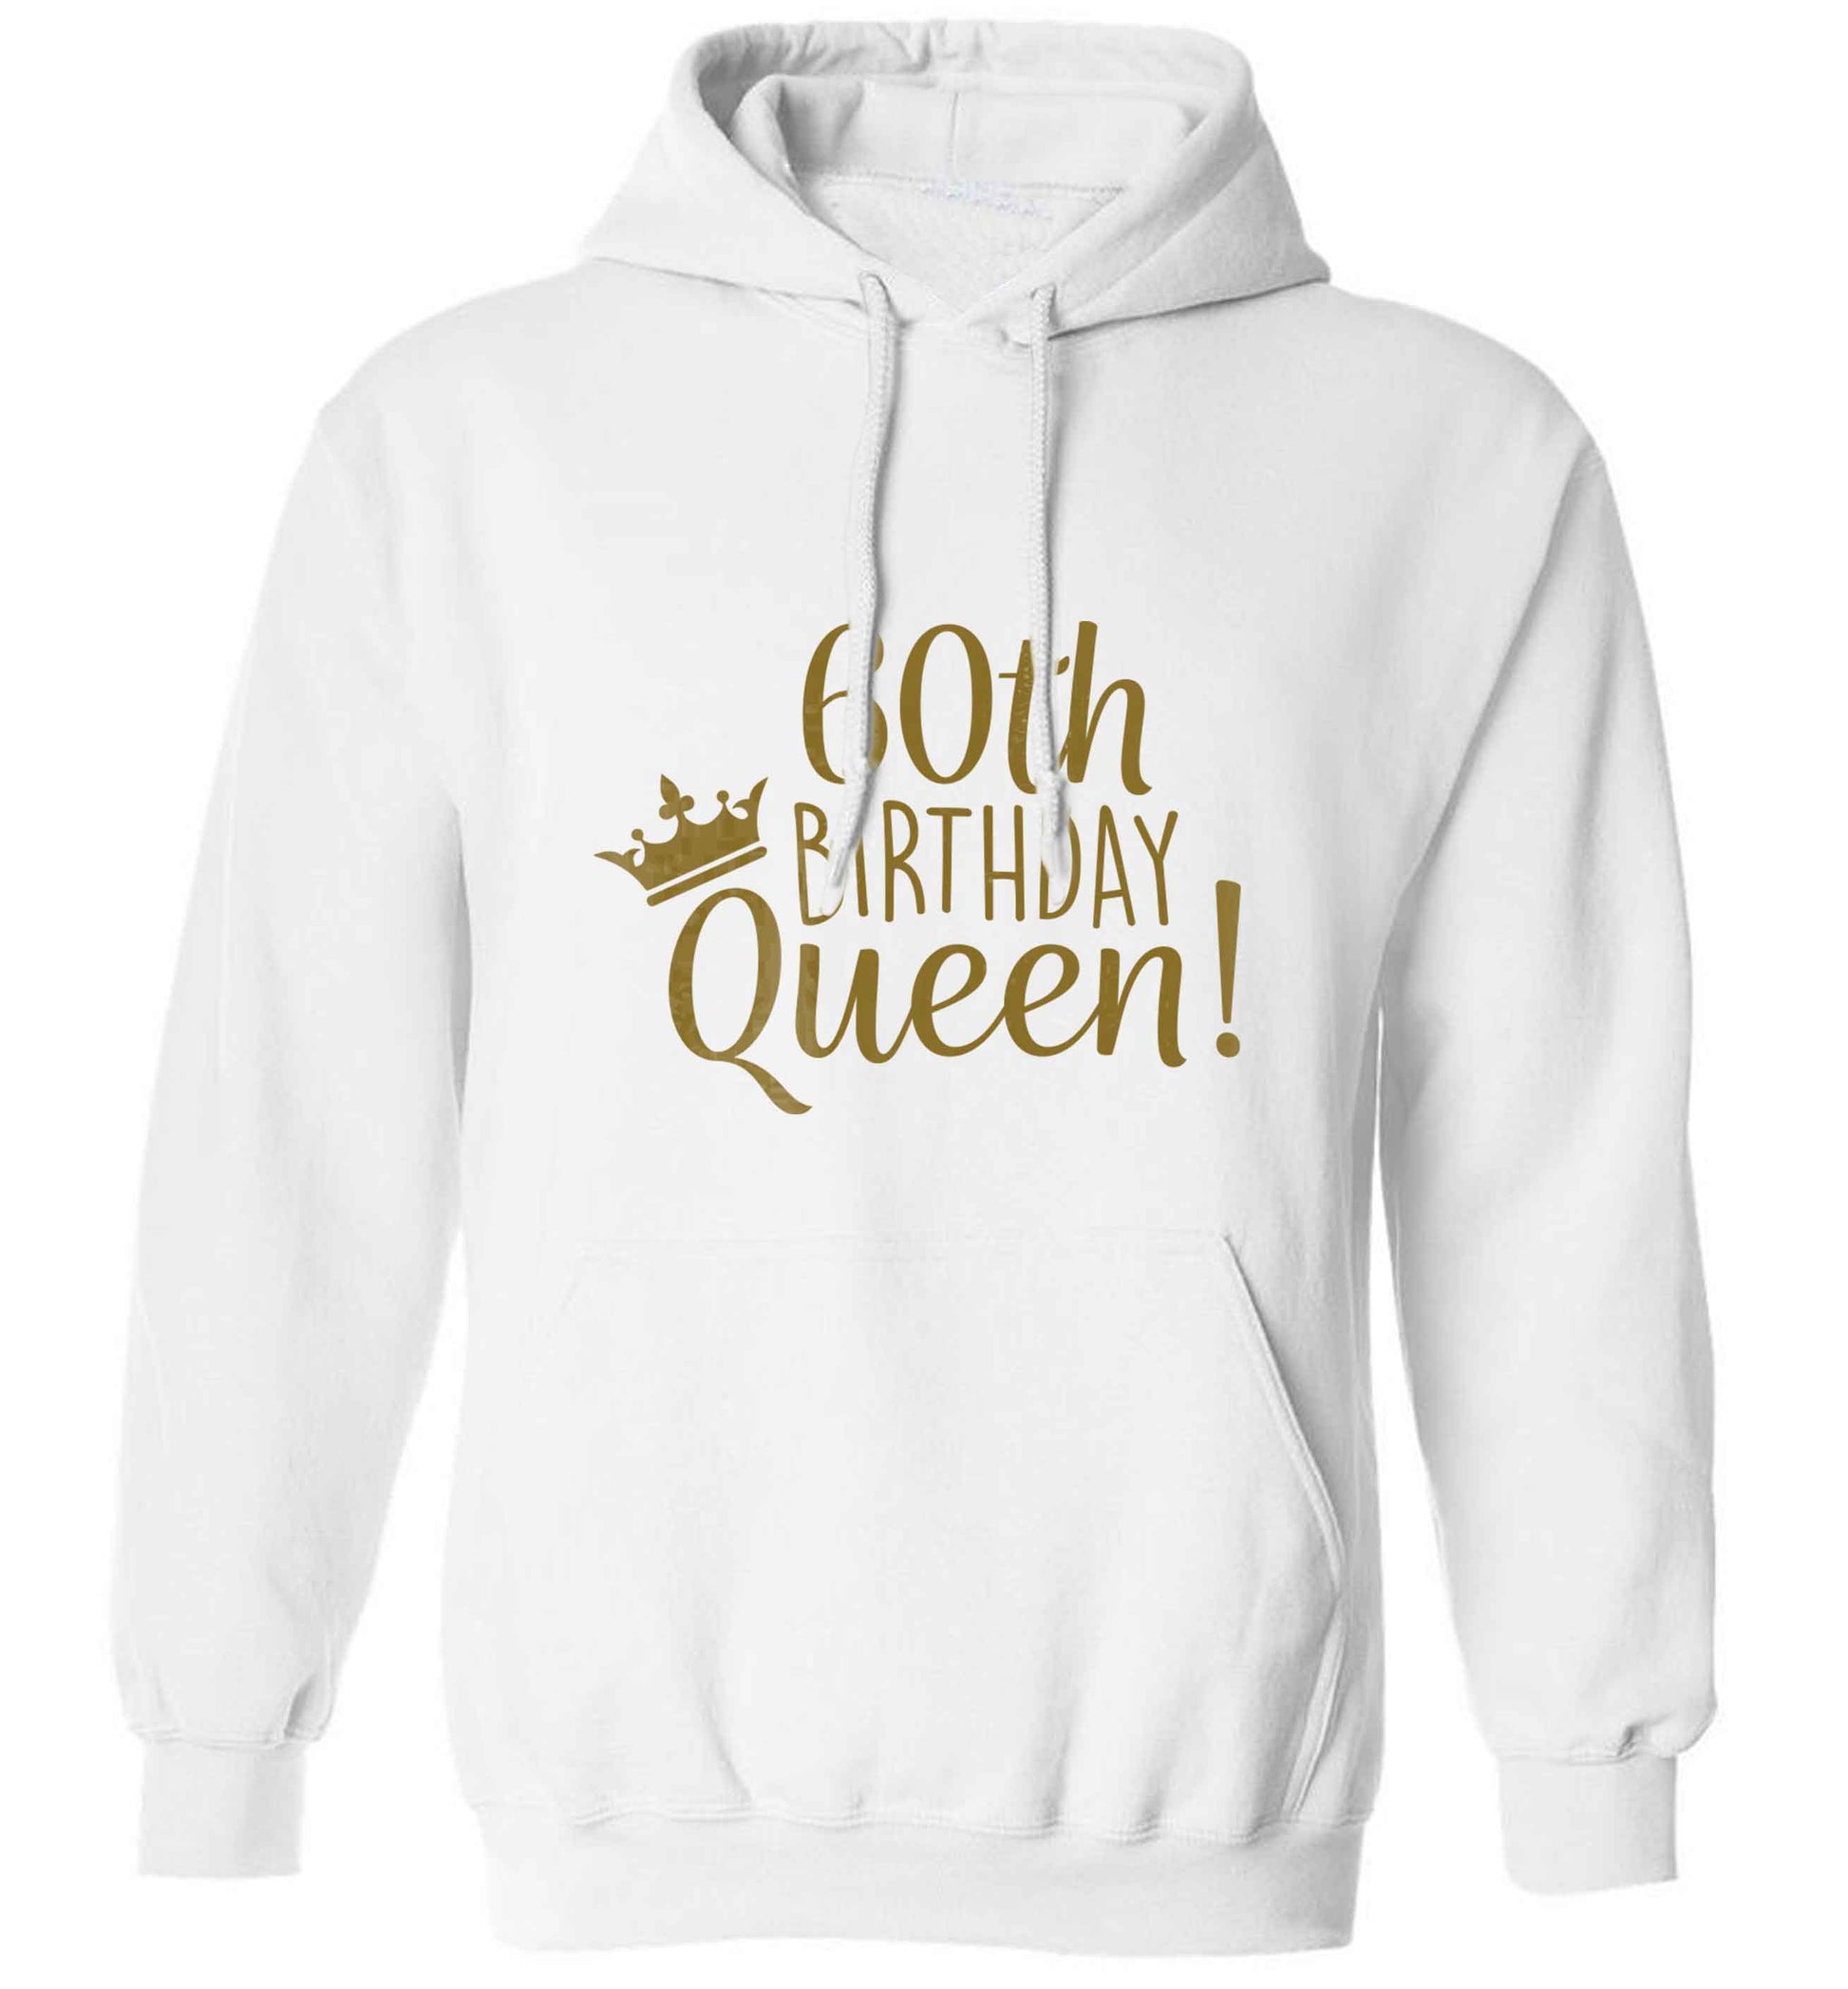 60th birthday Queen adults unisex white hoodie 2XL